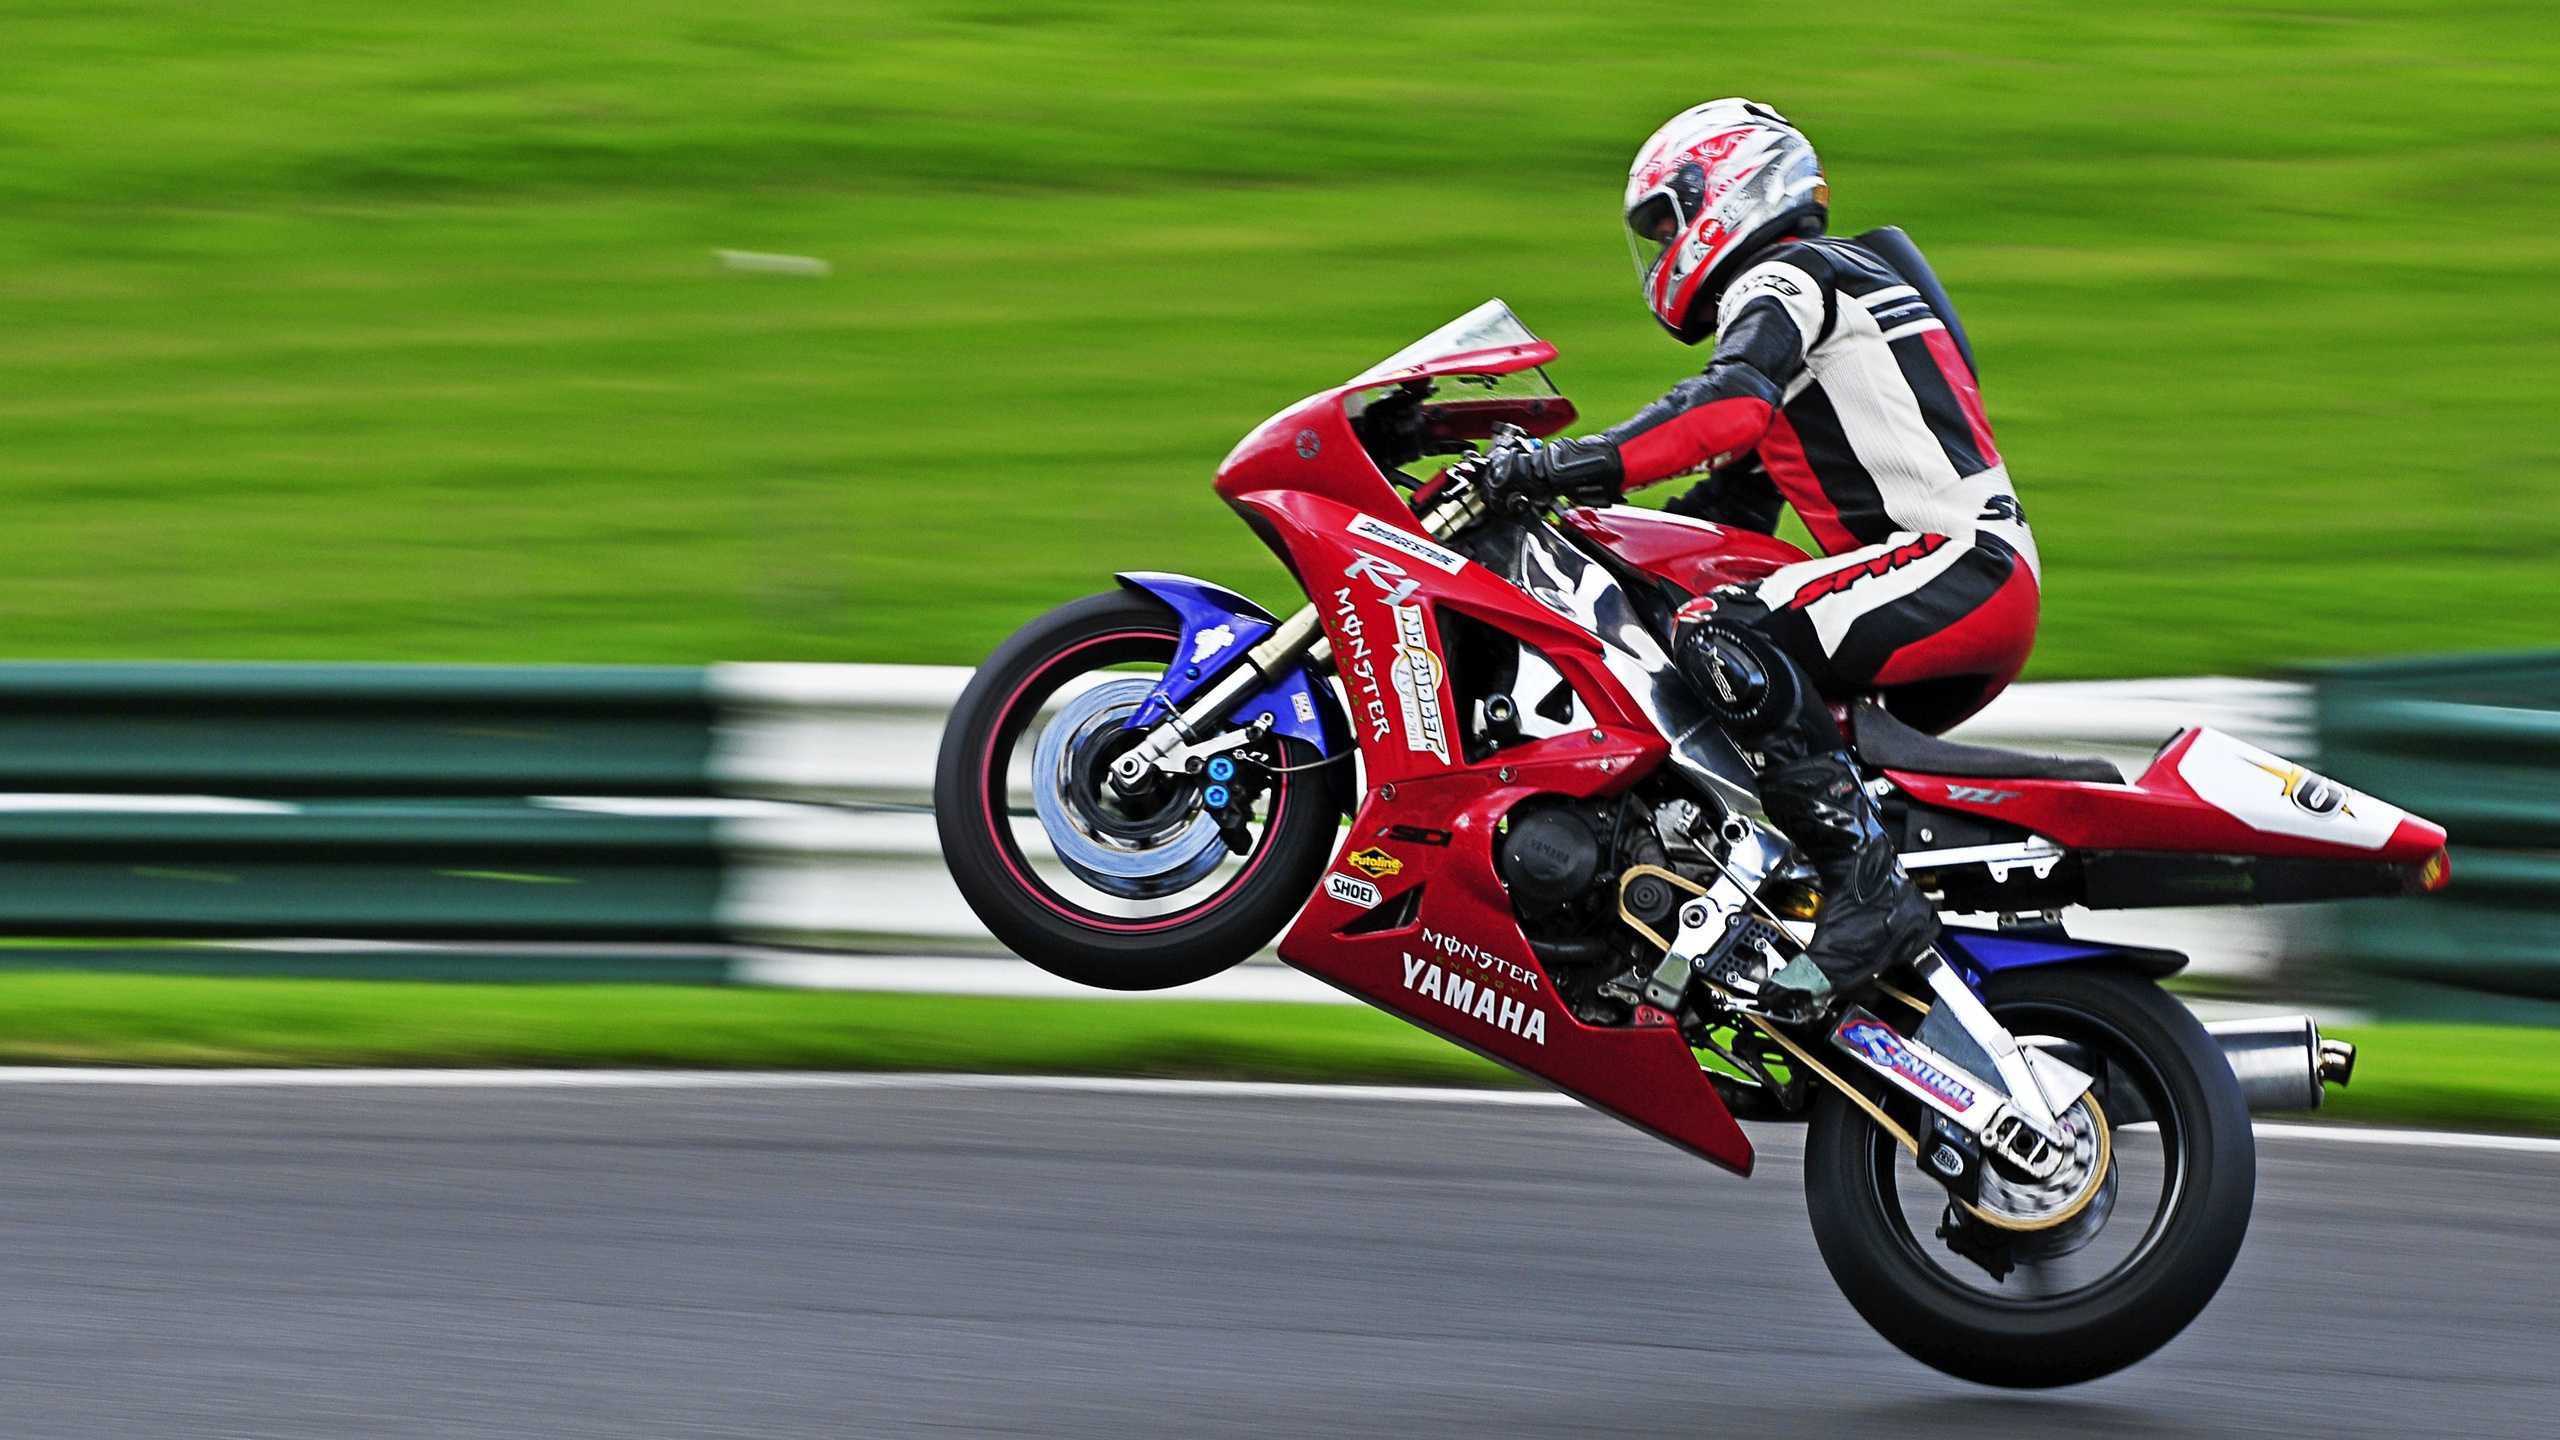 Man in Red and Black Motorcycle Suit Riding on Red Sports Bike. Wallpaper in 2560x1440 Resolution